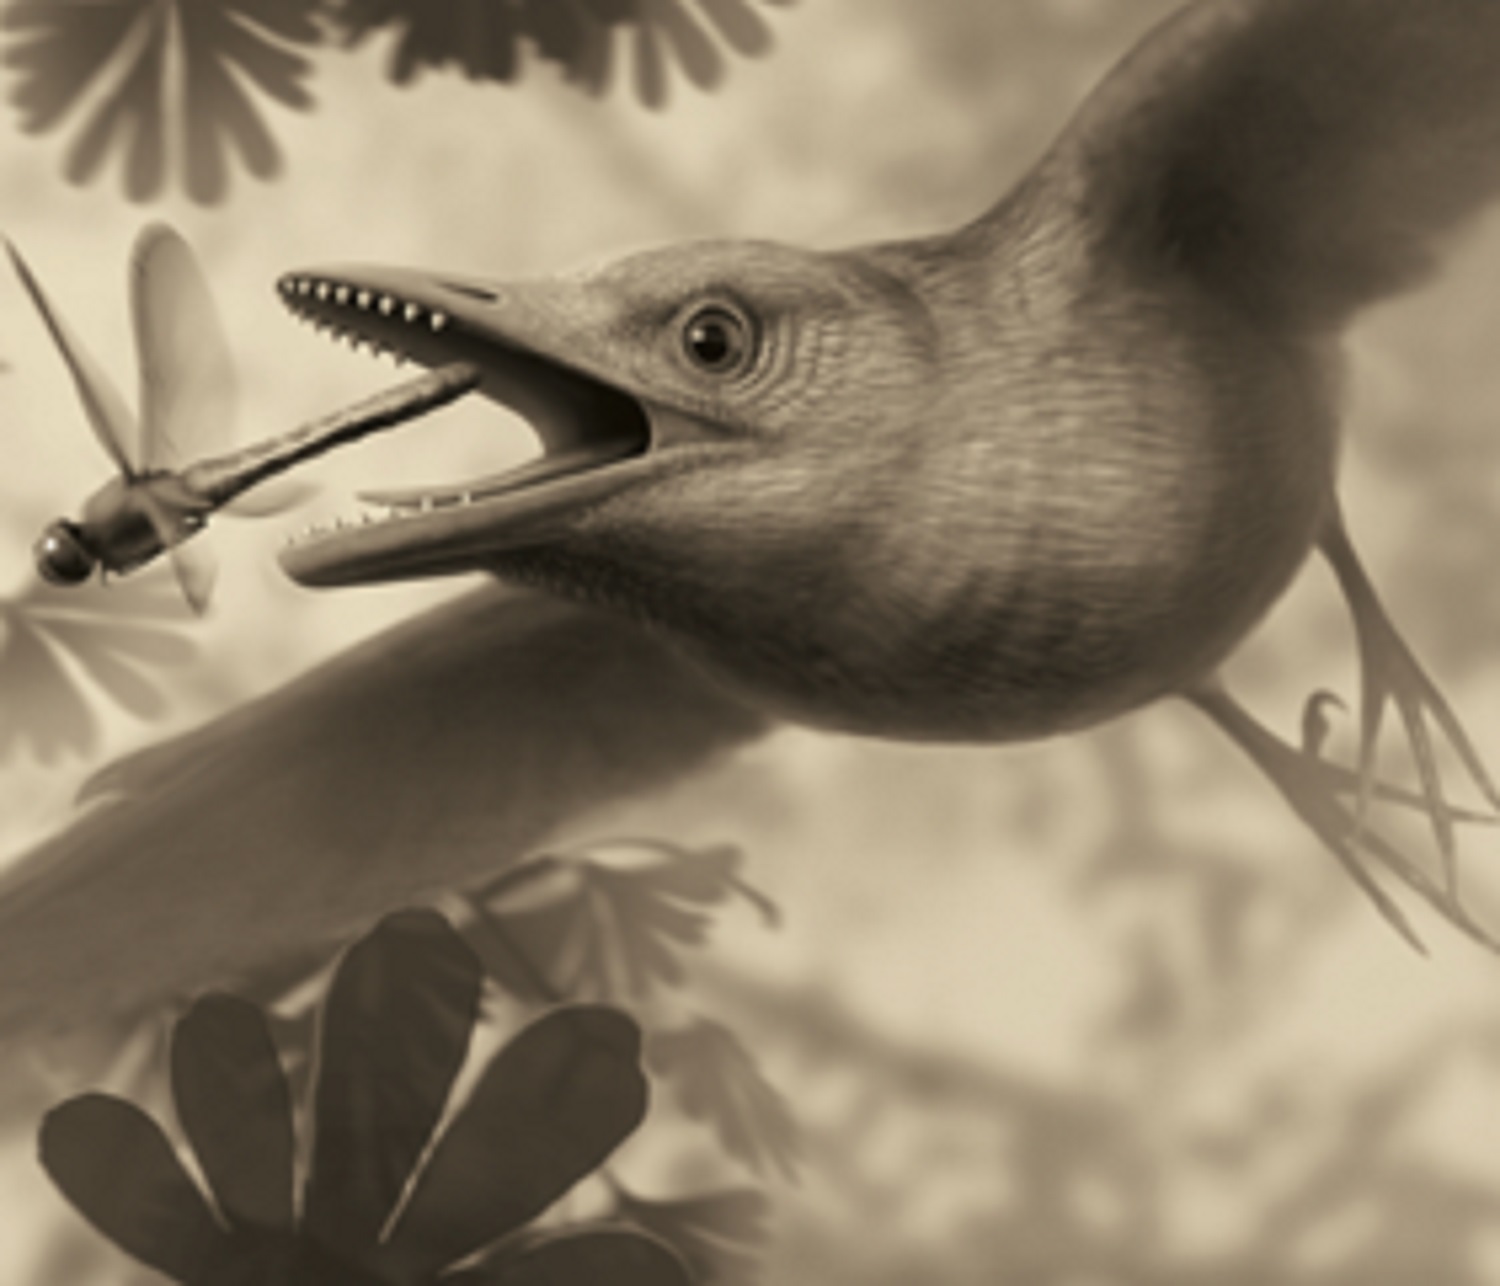 Were rocks on the menu for these ancient birds?